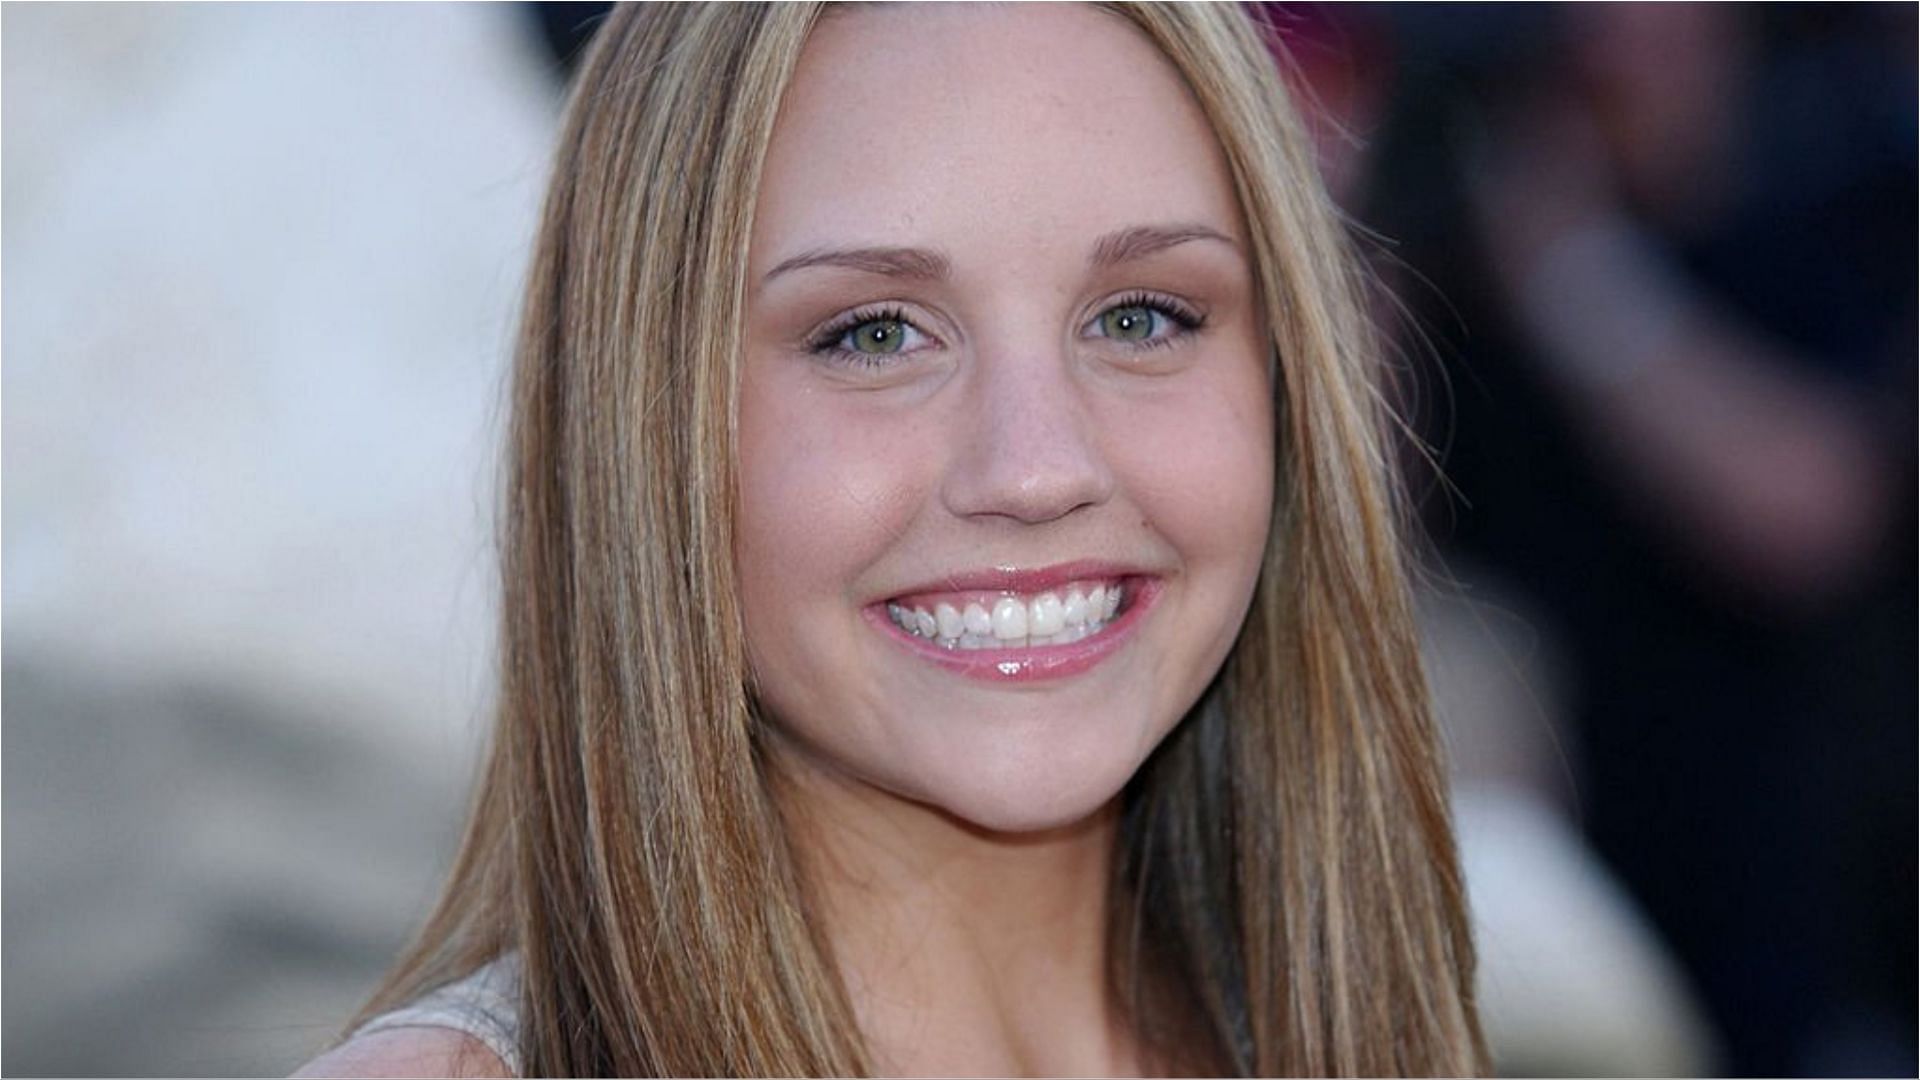 Amanda Bynes went for a manicure after being released from psychiatric hold (Image via Jon Kopaloff/Getty Images)